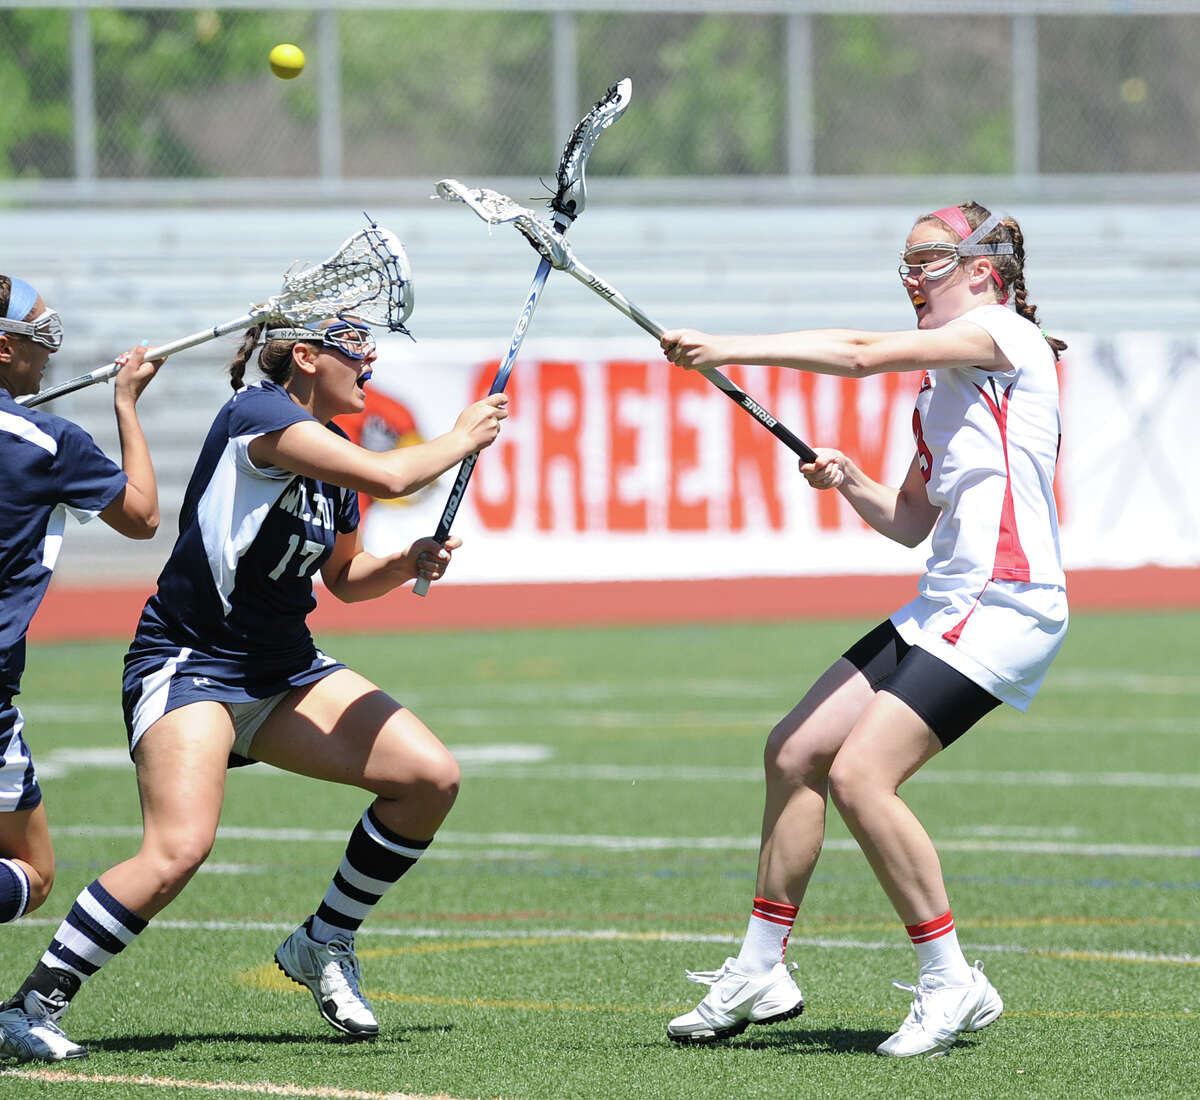 Claire Feeney, right, of Greenwich, scores a first half goal during the girls high school lacrosse match between Wilton High School and Greenwich High School at Greenwich, May 12, 2012. Wilton won the match 18-9. Covering on the play for Wilton is Liz Reda # 17.